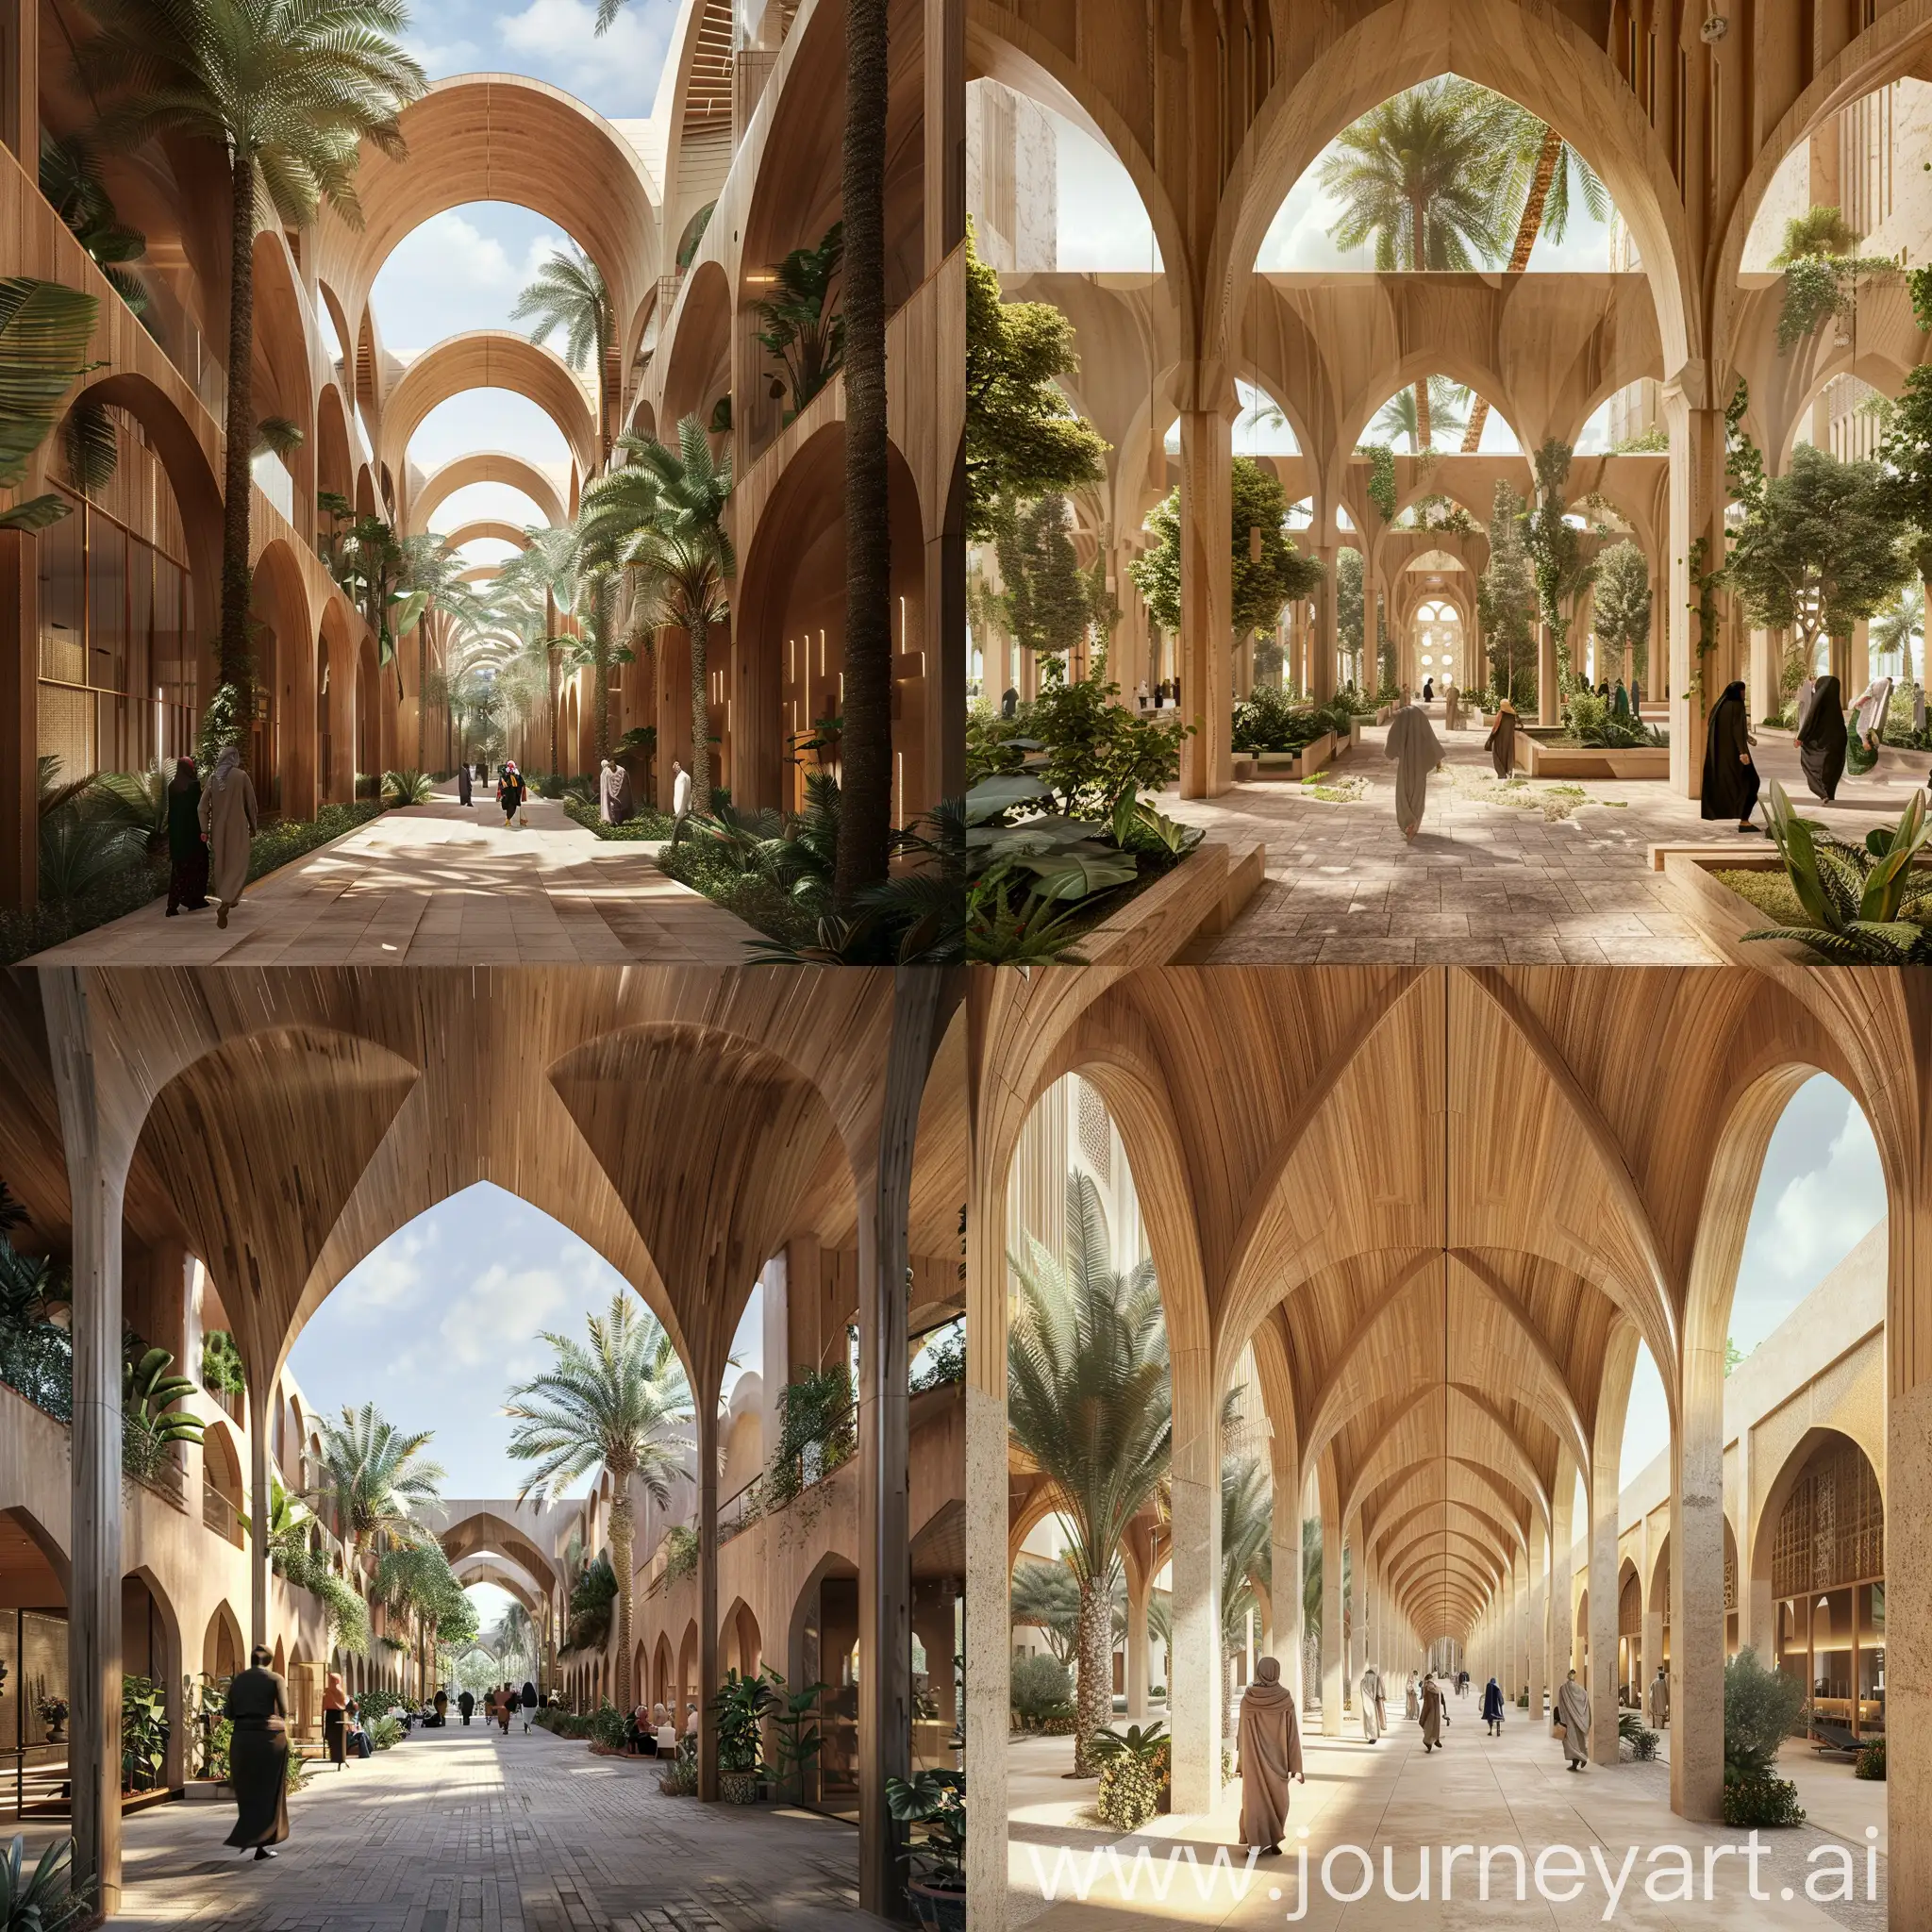 Diverse-Architectural-Fusion-Islamic-Andalusian-and-Royal-Eras-in-Urban-Community